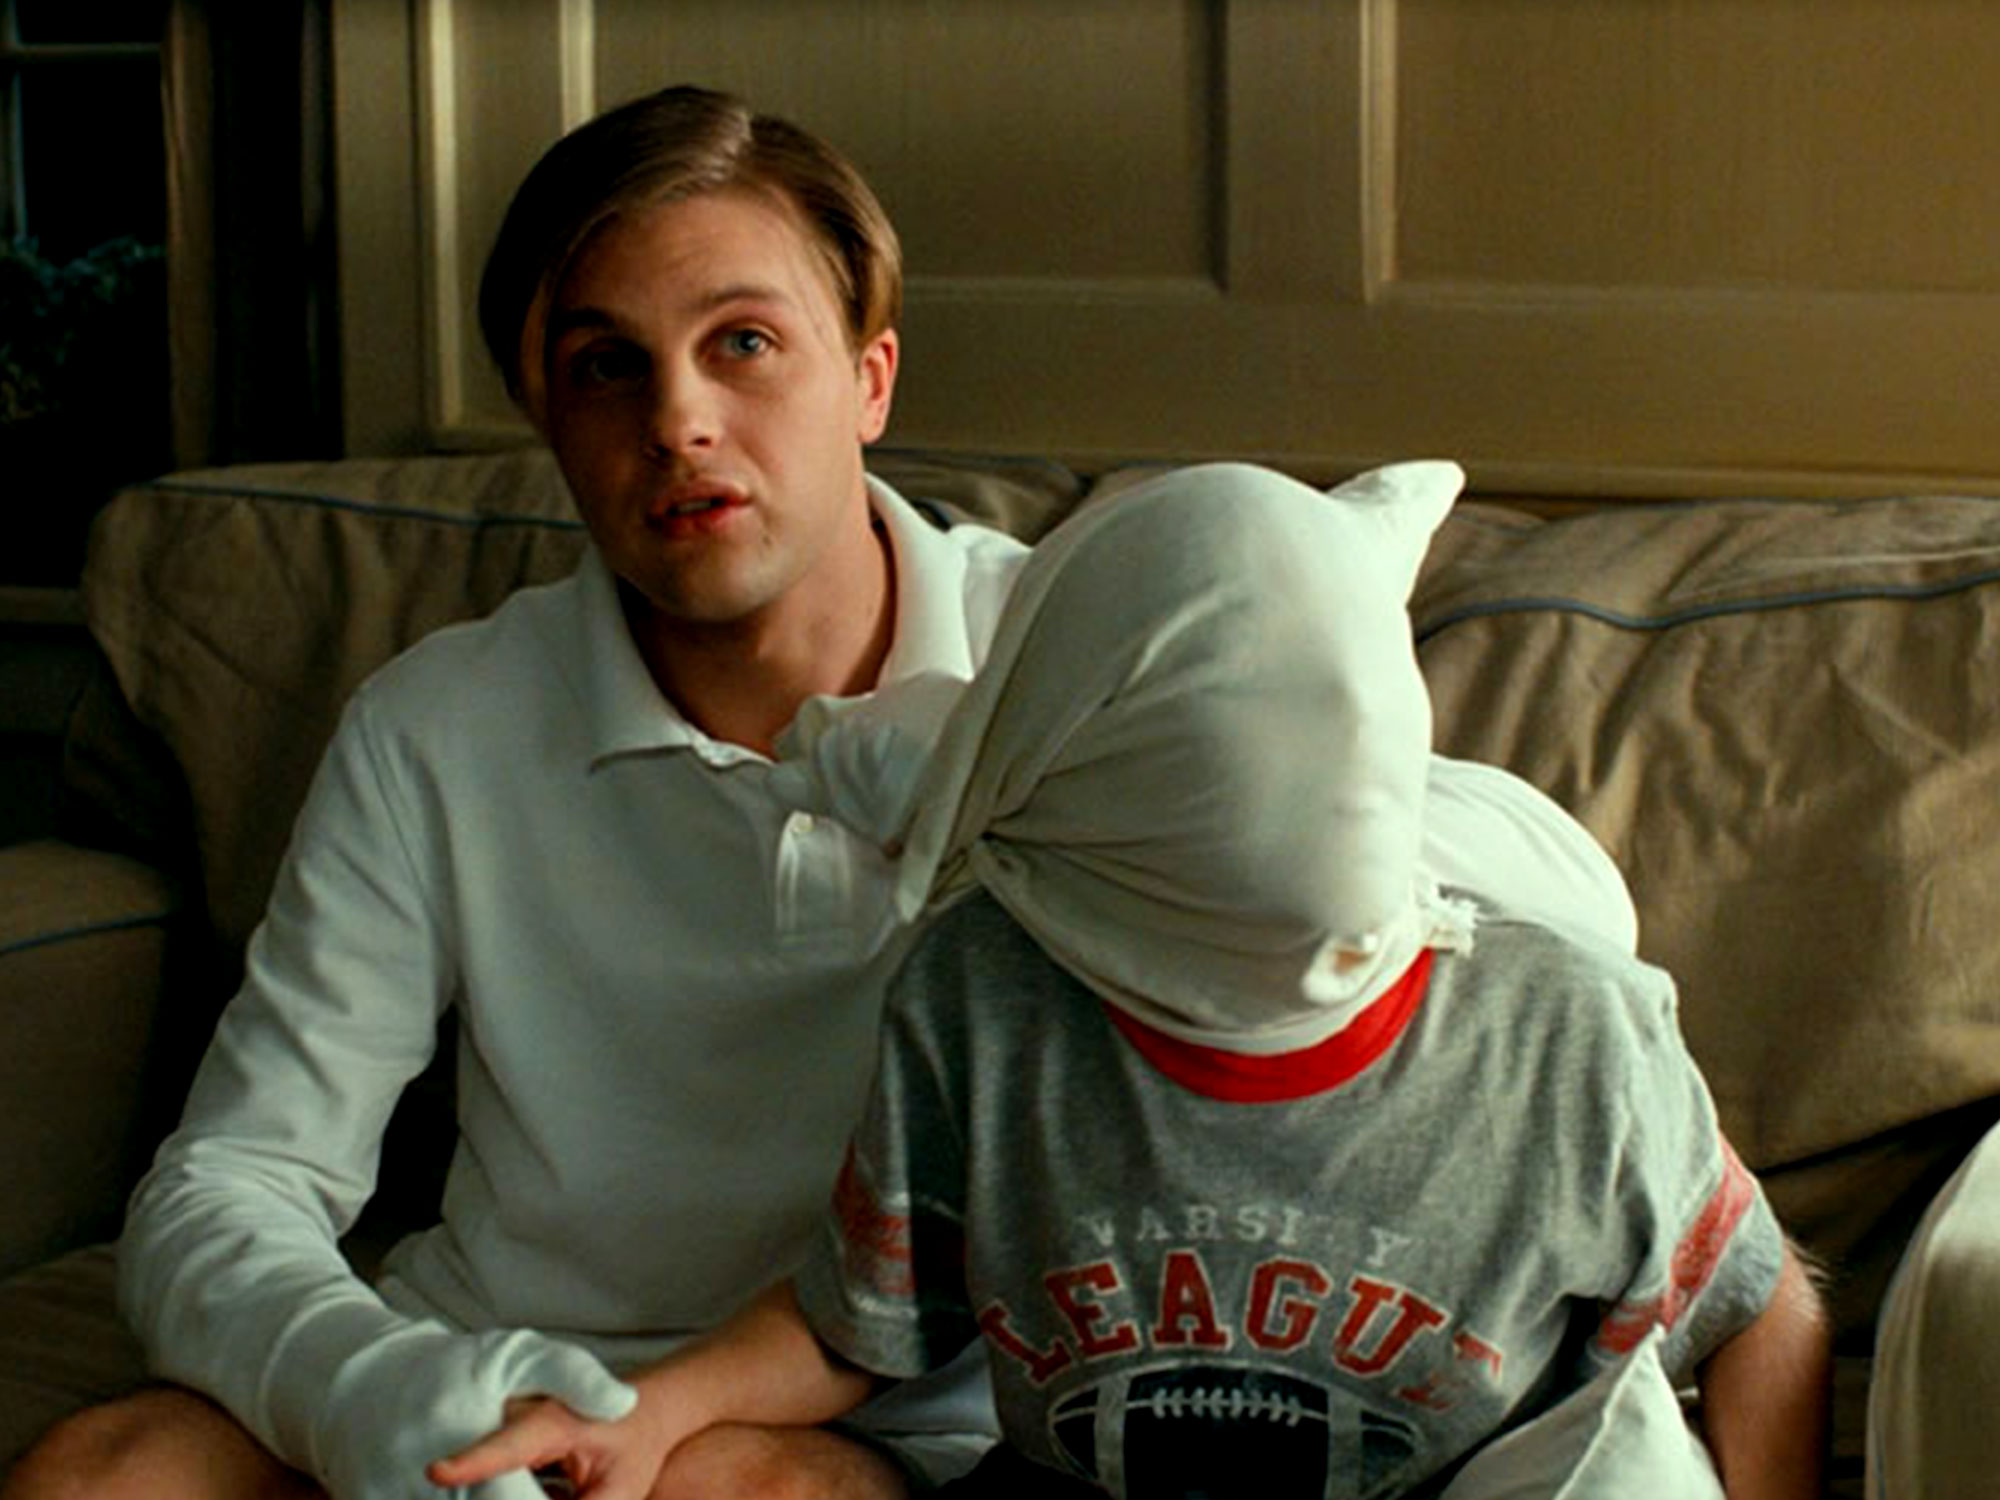 Funny Games Review